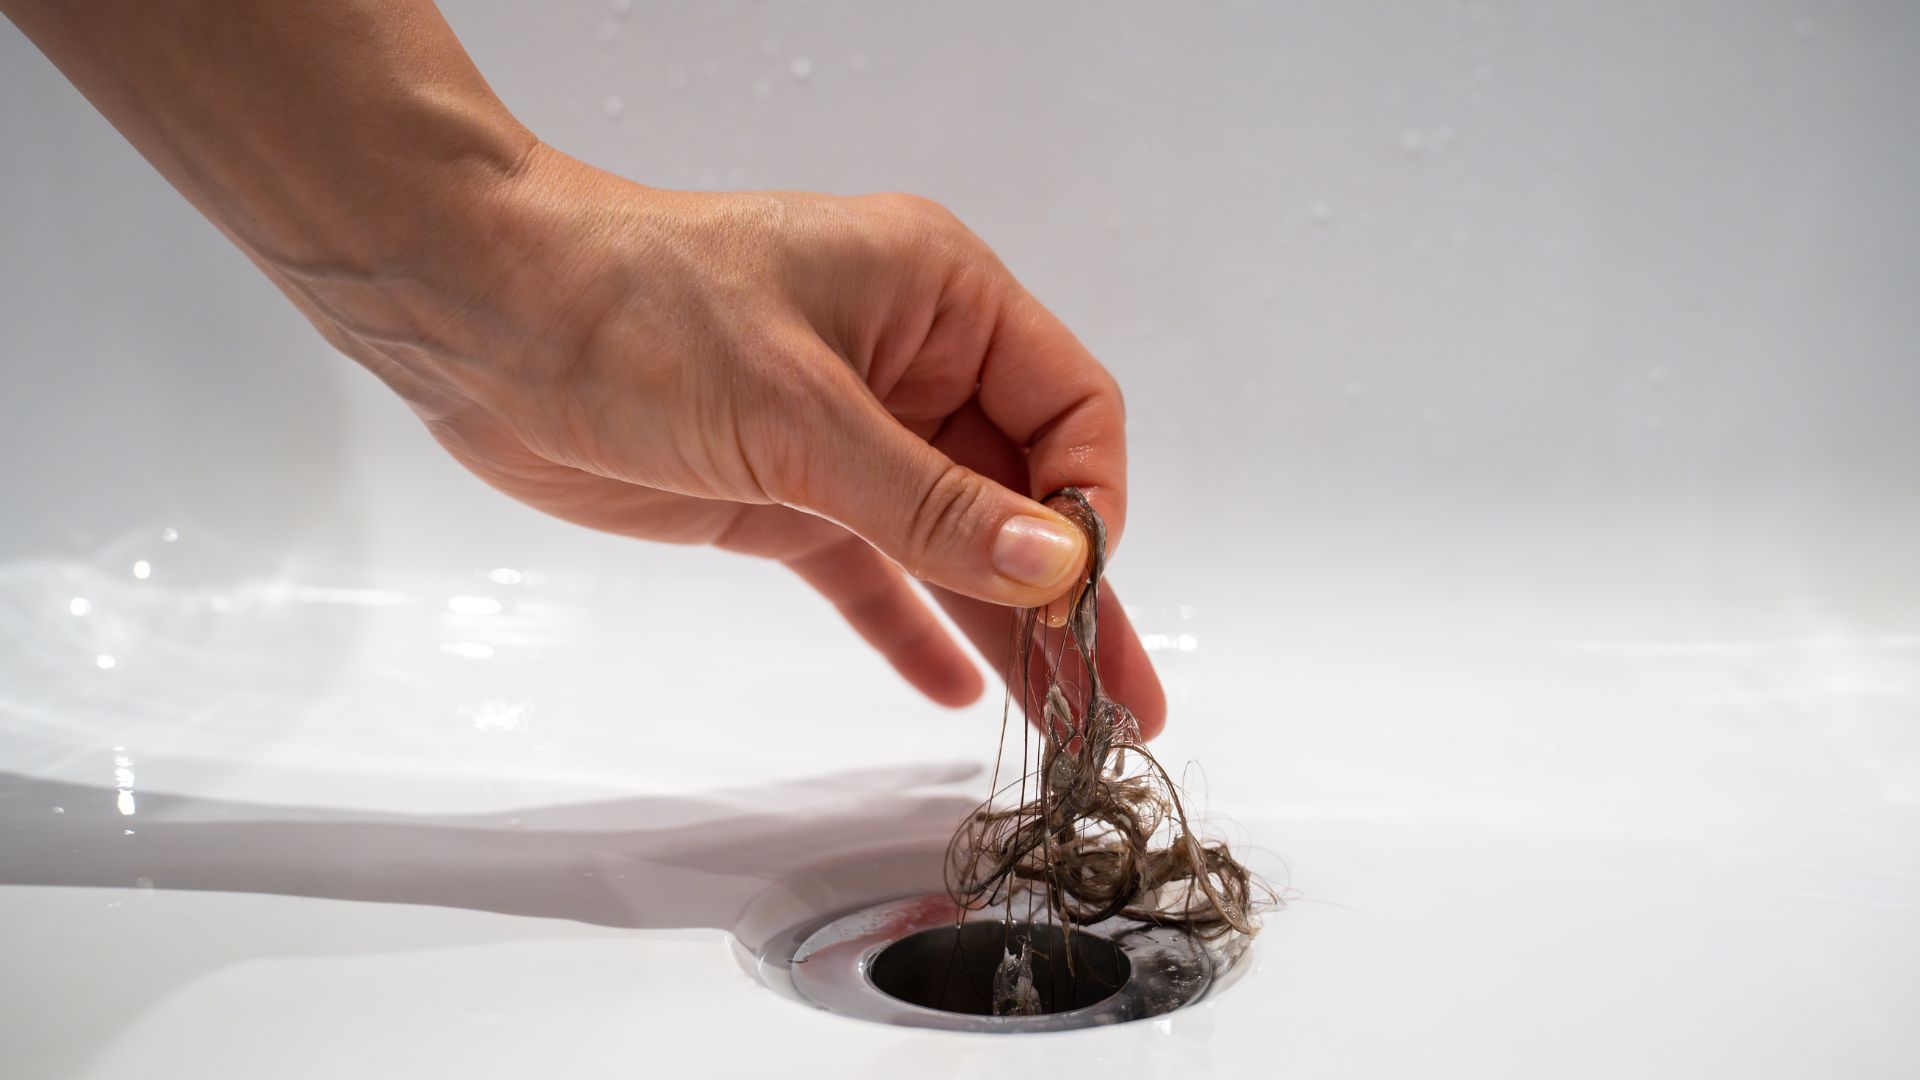 Hair and Debris Removal by plumber